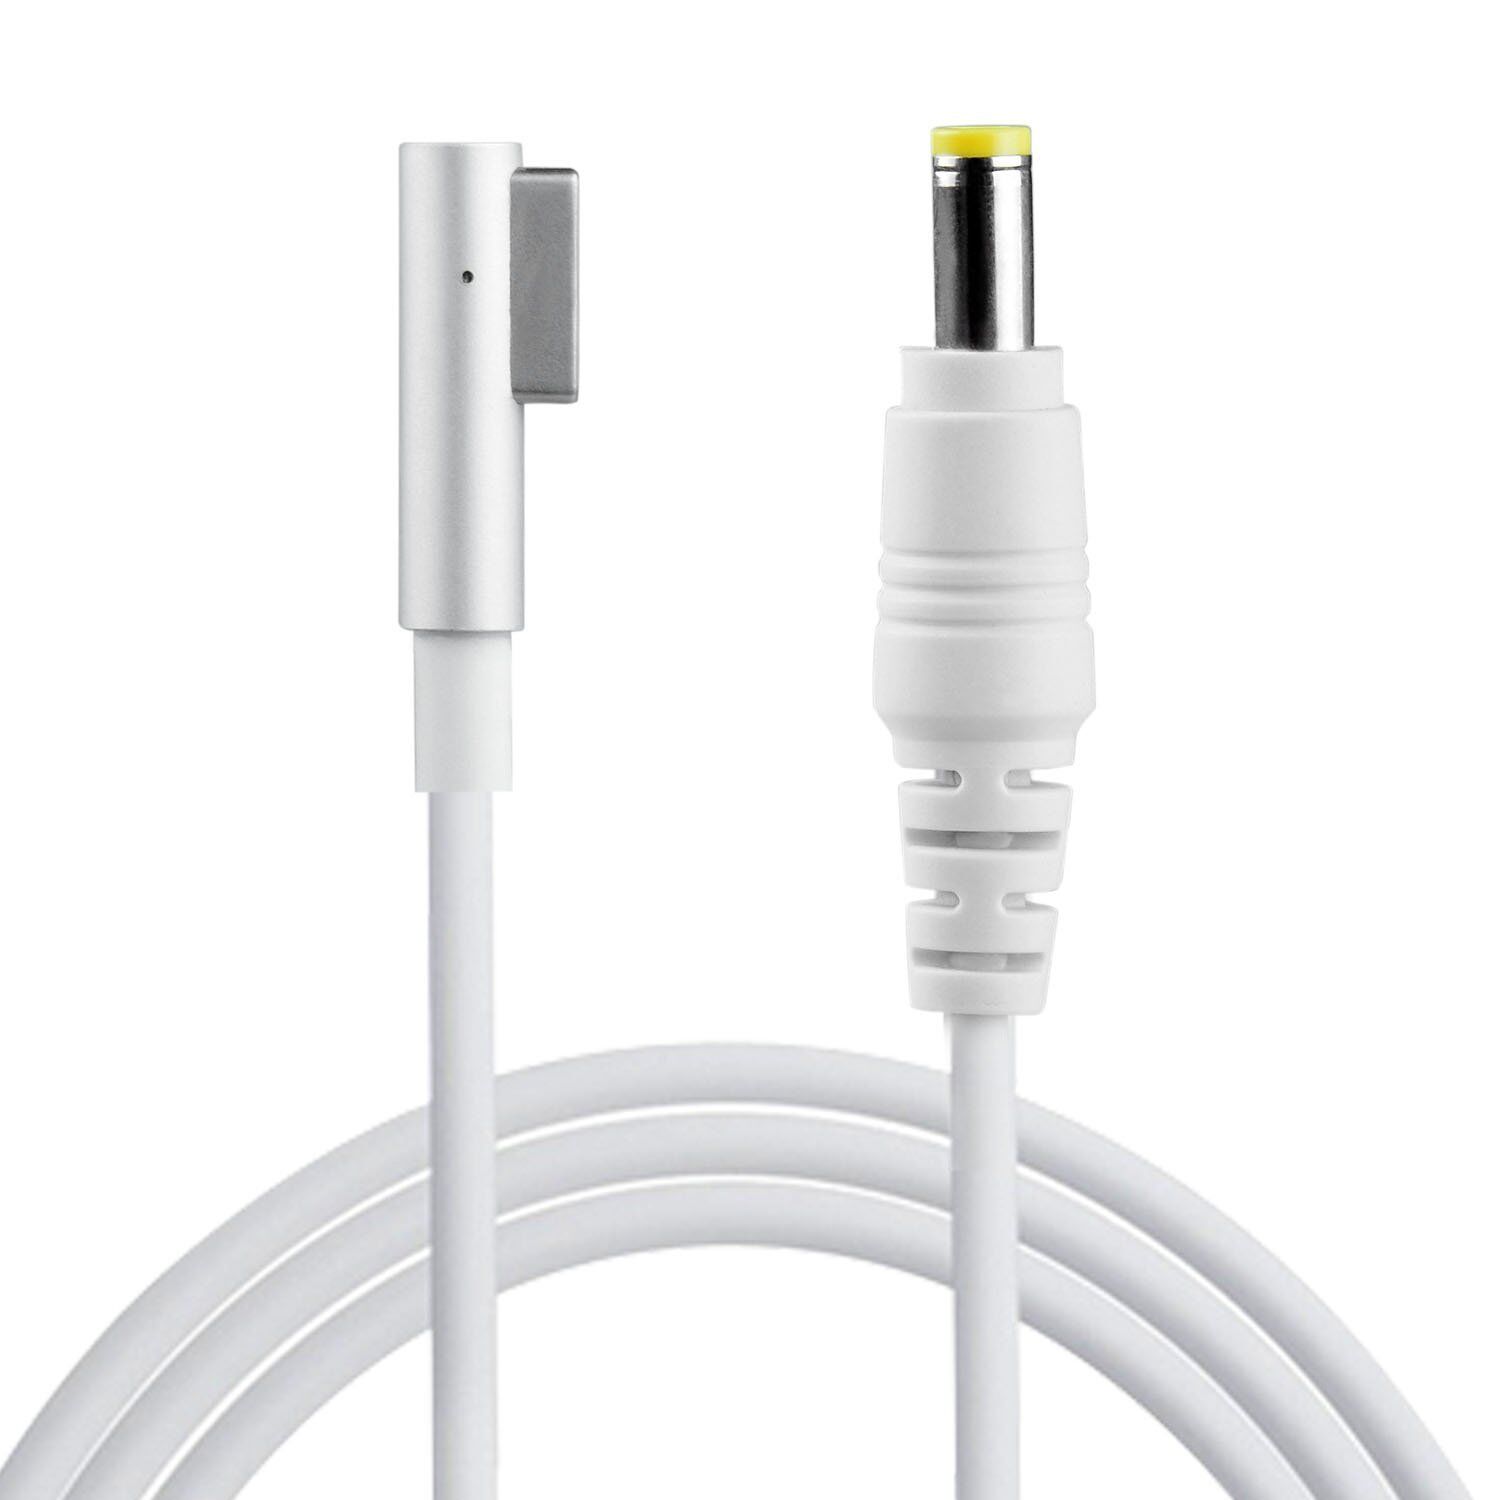 DC 5.5x2.5 to MagSafe1/2 Charging cable for Macbook Air/Pro Work with Power Bank